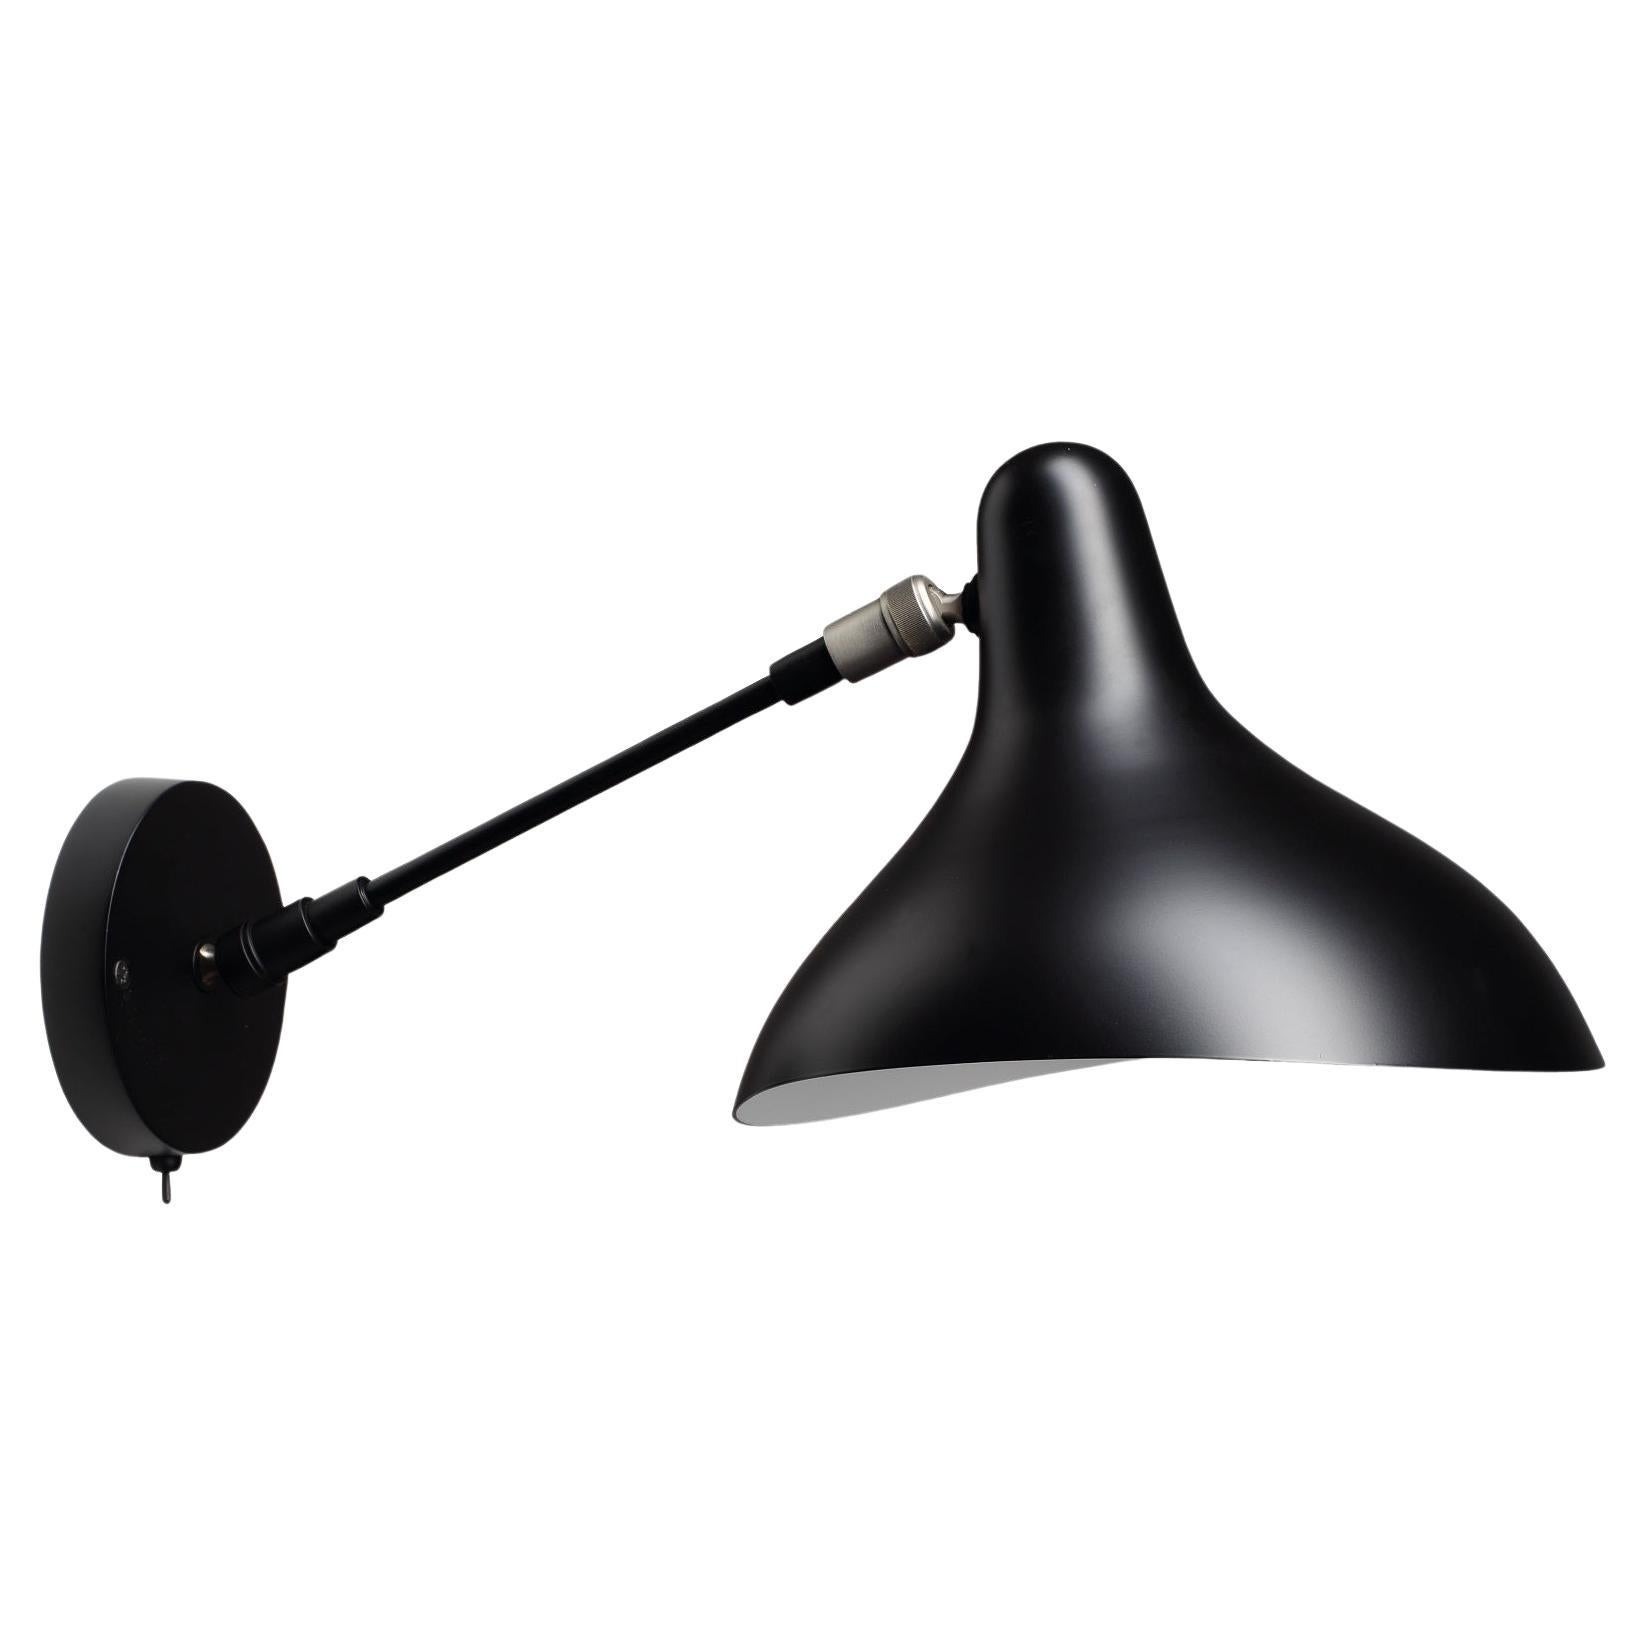 DCW Editions Mantis BS5 SW Wall Lamp in Black Steel and Aluminum